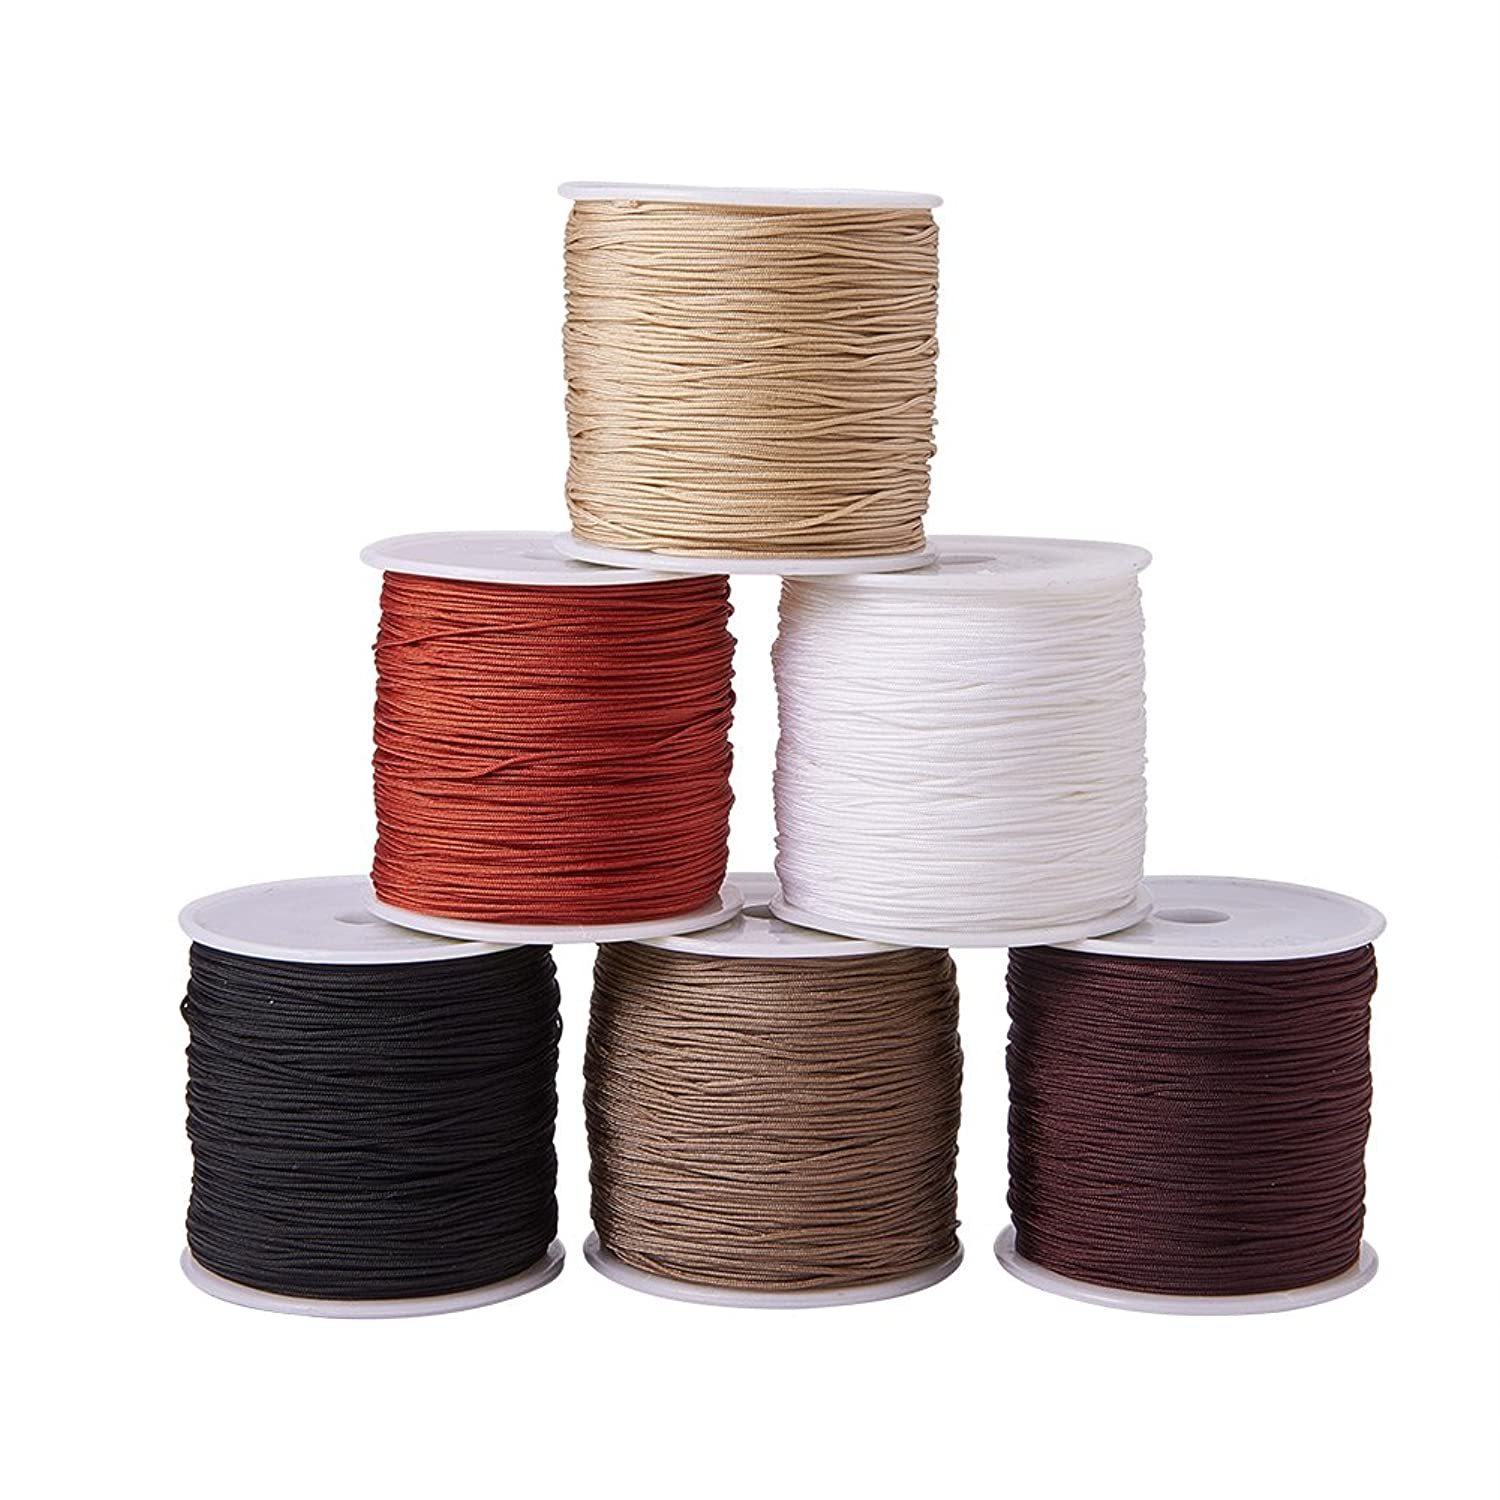 6 Colors 0.8Mm Nylon Beading String Cord 600Yards Chinese Knotti..